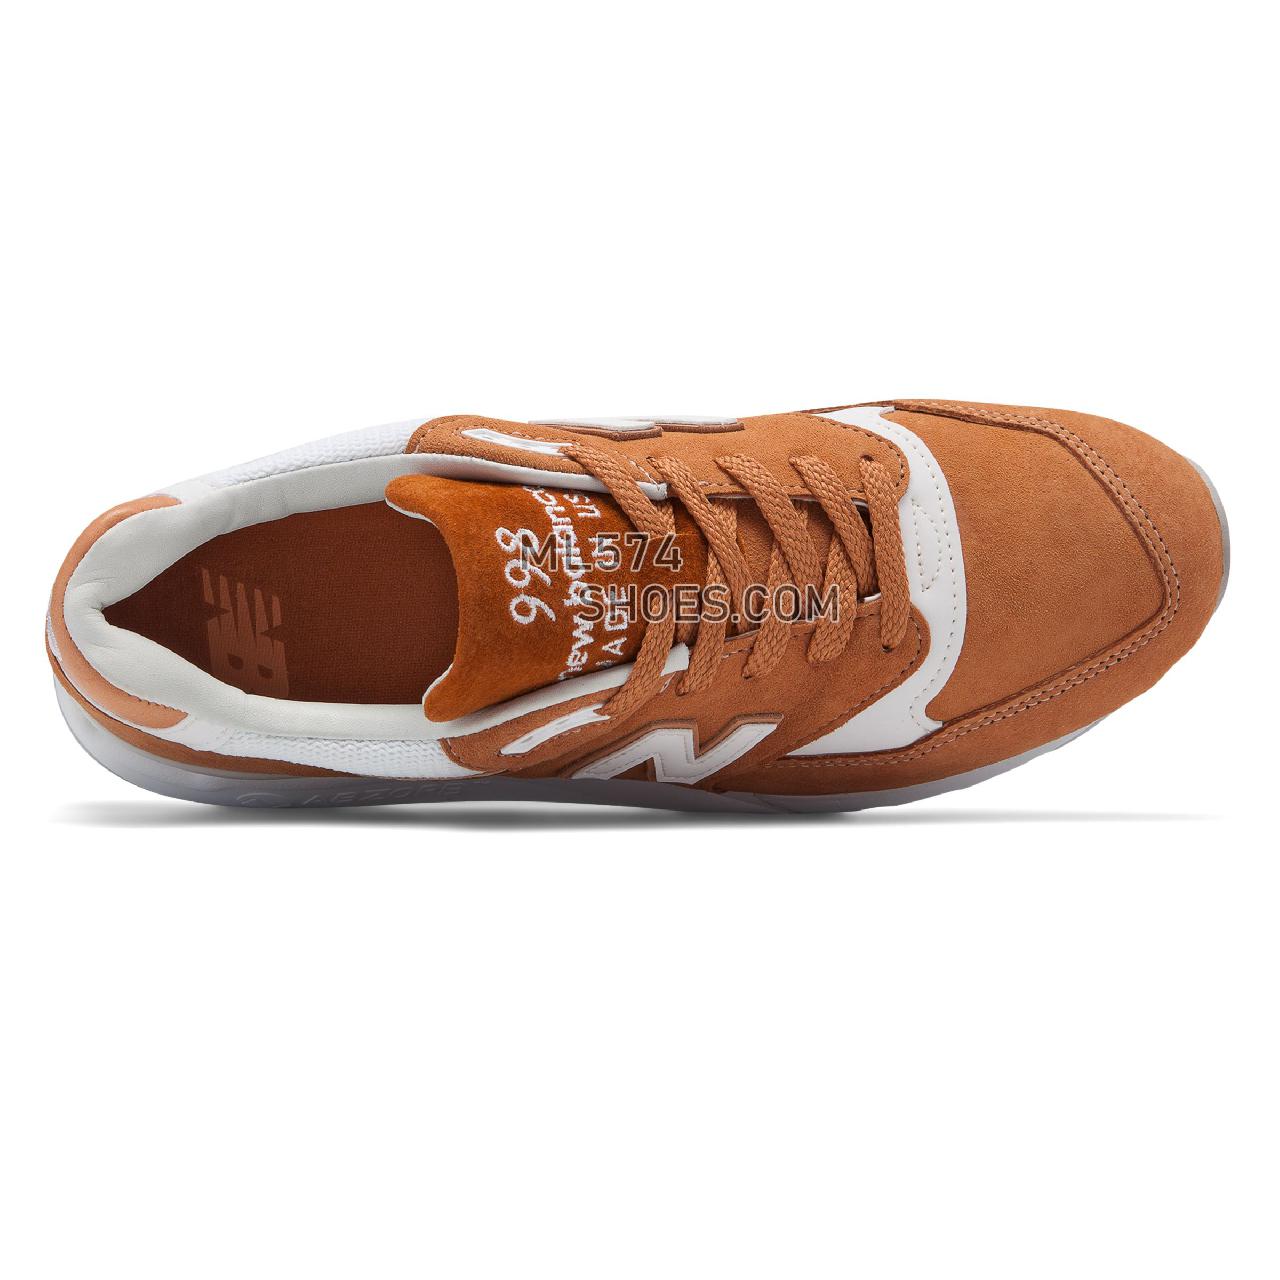 New Balance Made in US 998 - Men's 998 Made in US Classic M998-EPL - Brown Sugar with White - M998TCC